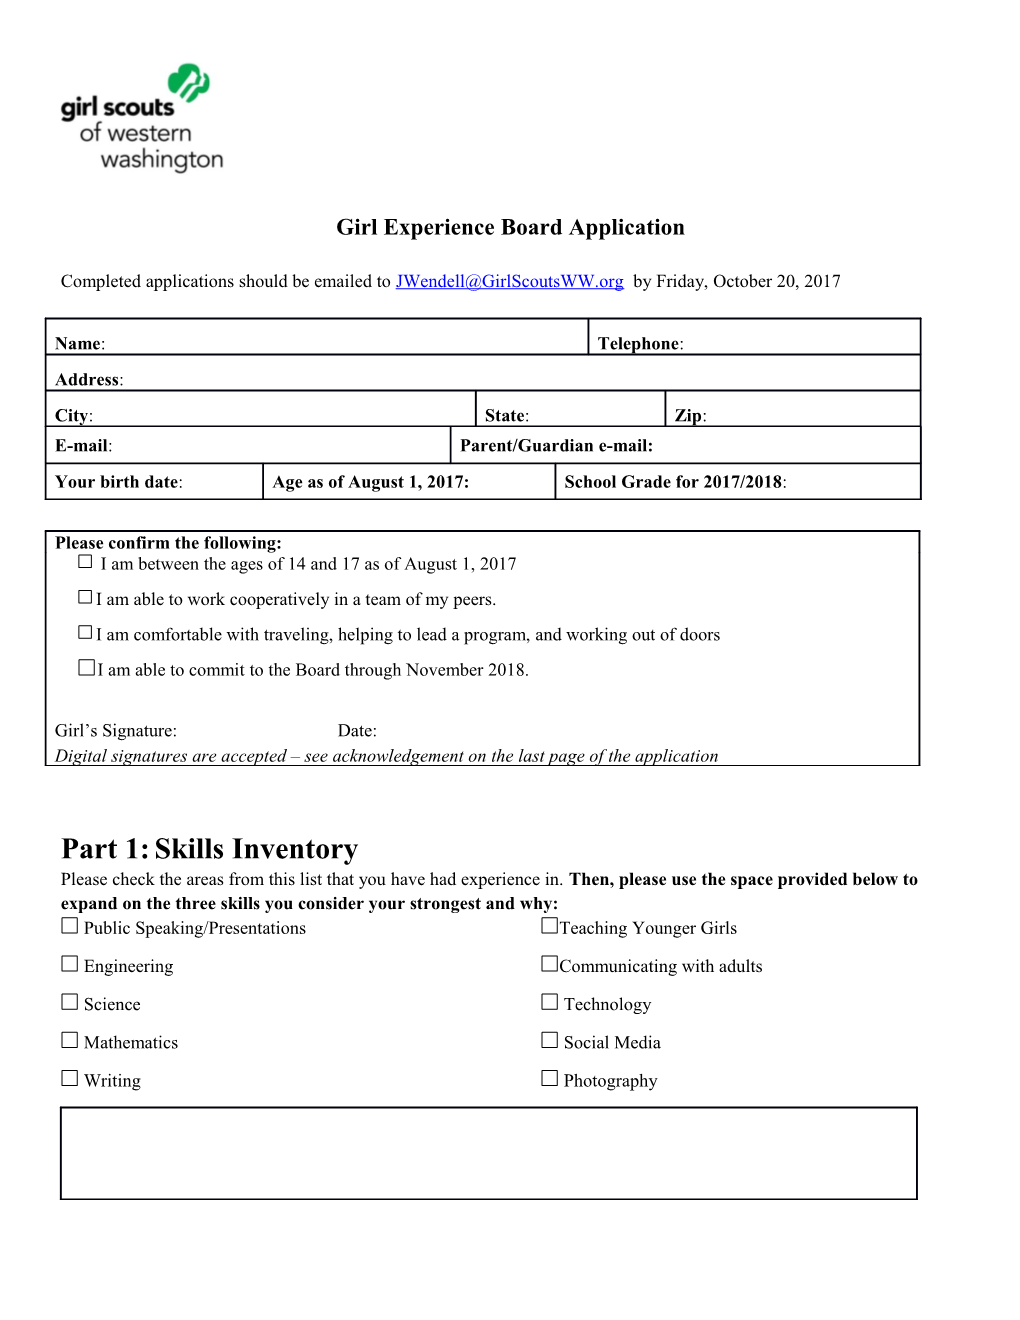 Girl Experience Board Application